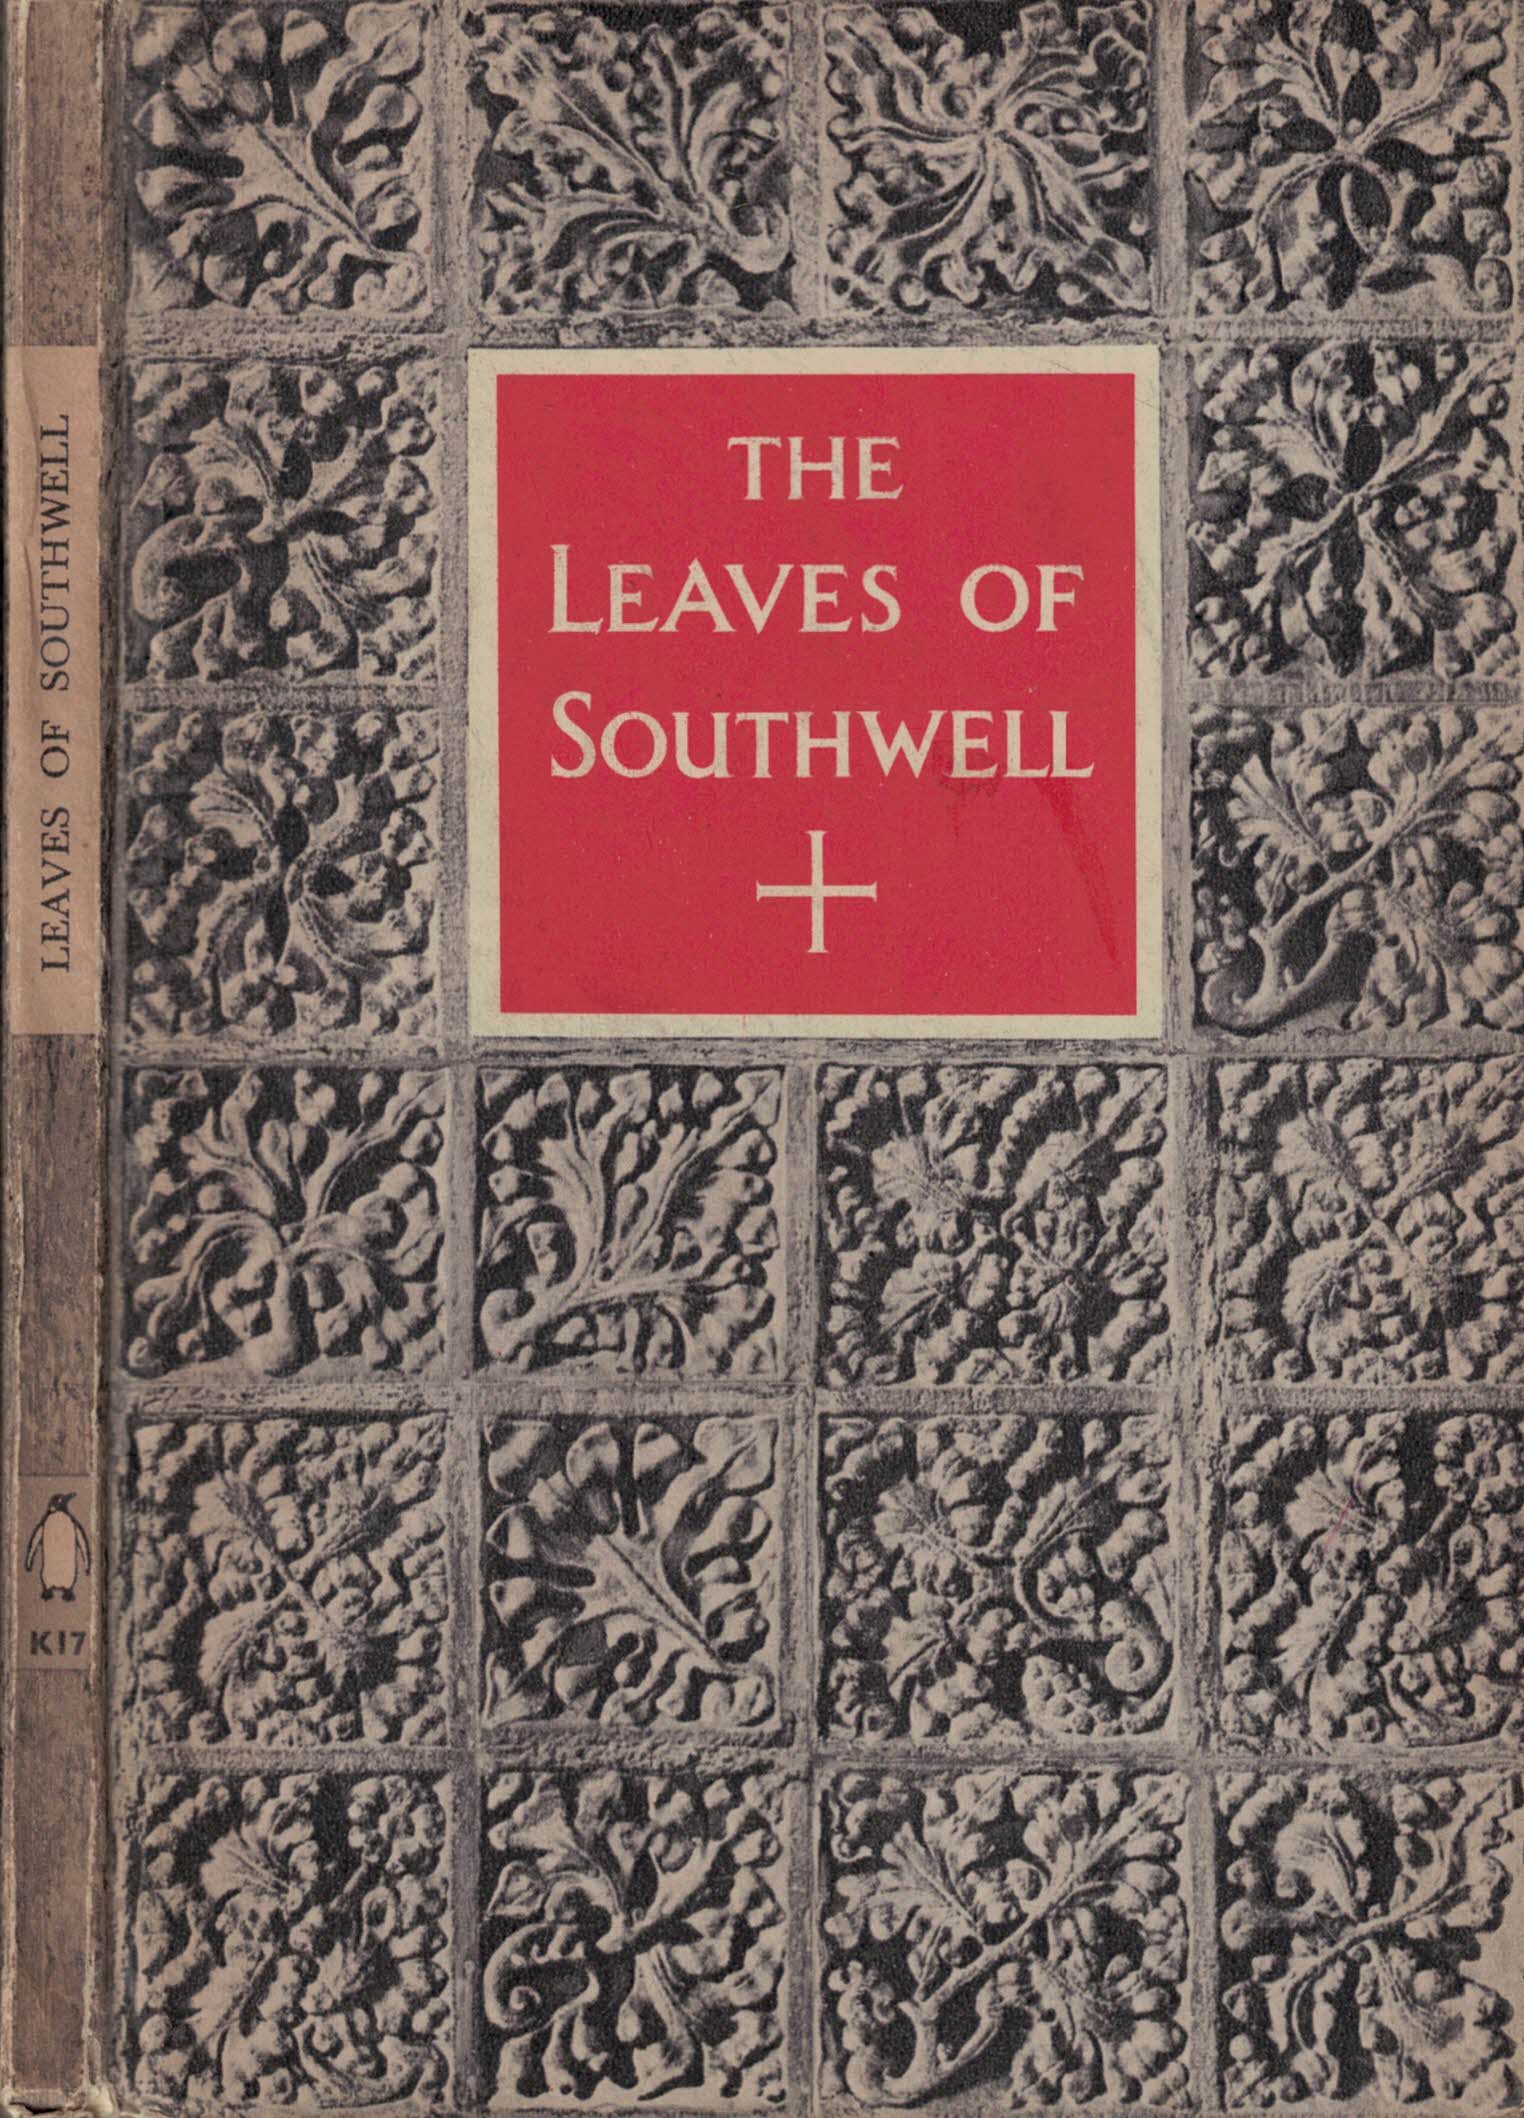 The Leaves of Southwell. King Penguin No. 17.